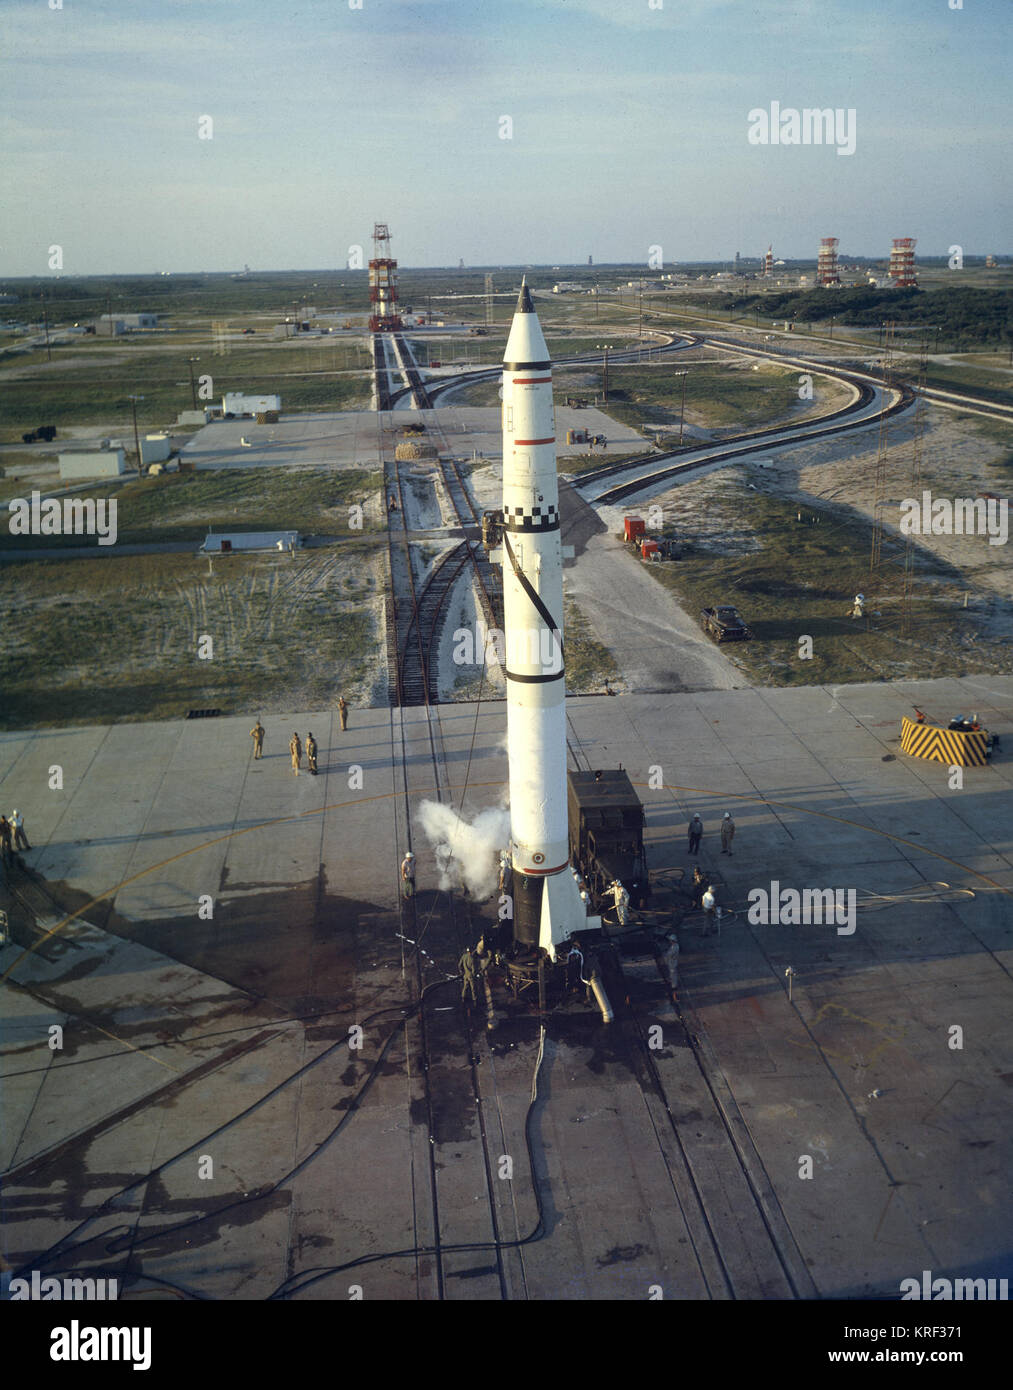 Dusk view of Missile Row at Cape Canaveral Air Force Station 1965 Photo Print 